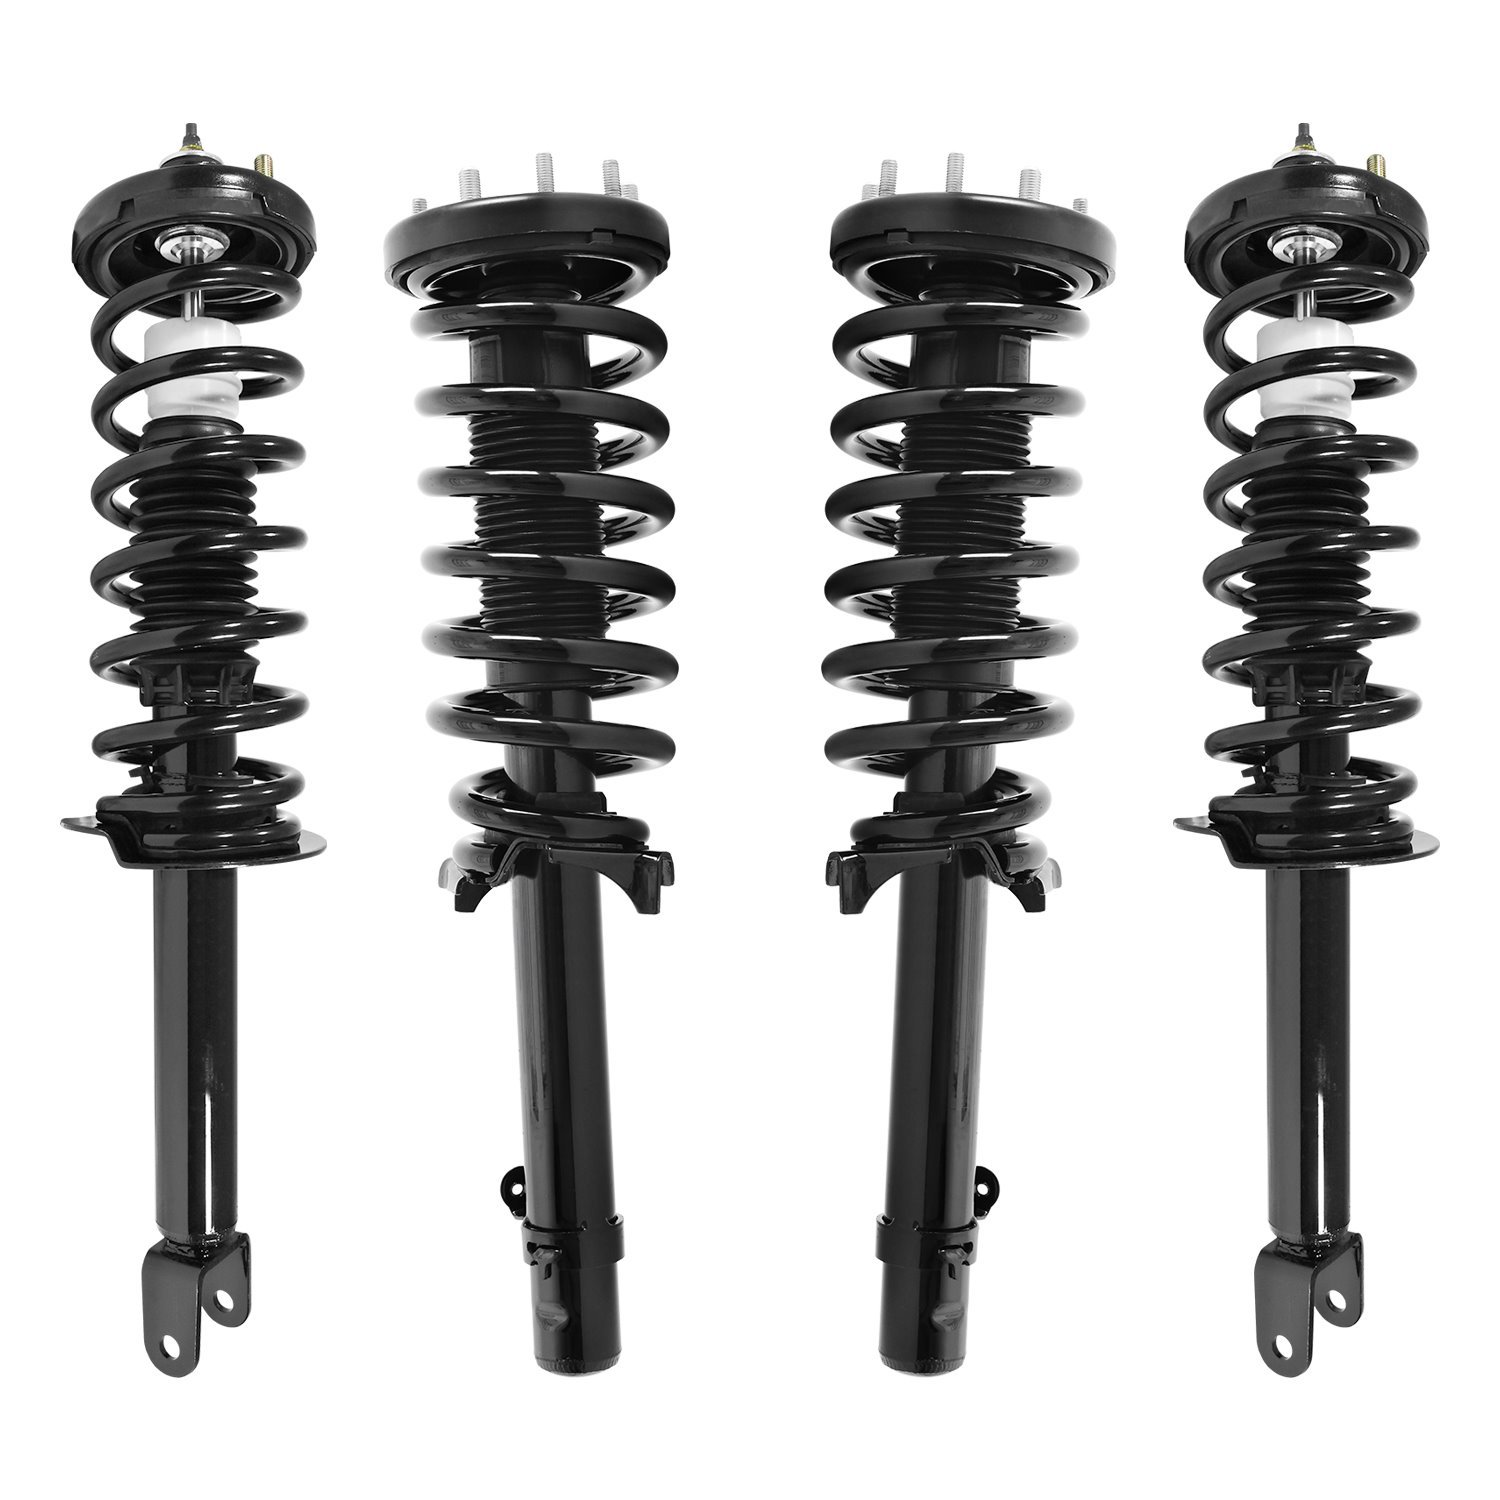 4-11237-15180-001 Front & Rear Suspension Strut & Coil Spring Assembly Kit Fits Select Honda Accord